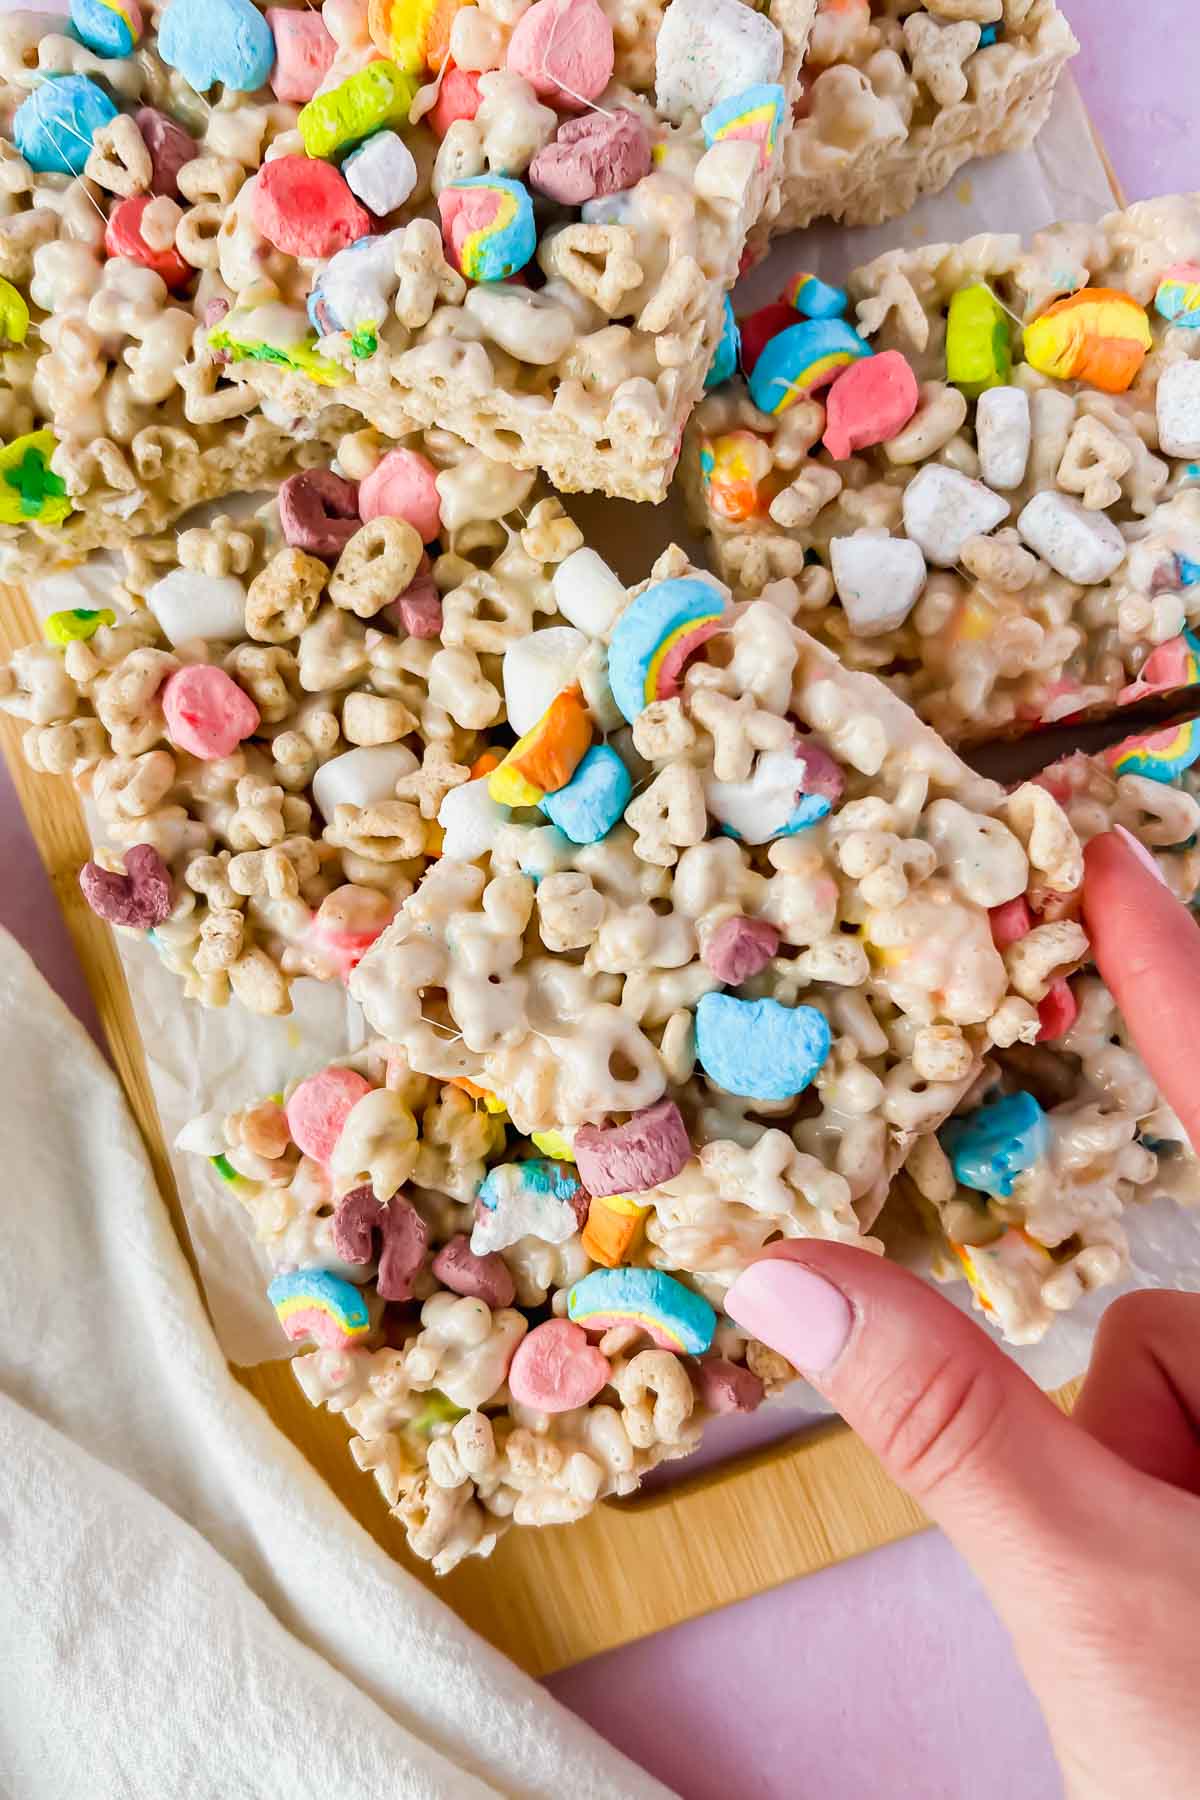 lucky charm rice krispie treats cut into squares with hand picking one up.